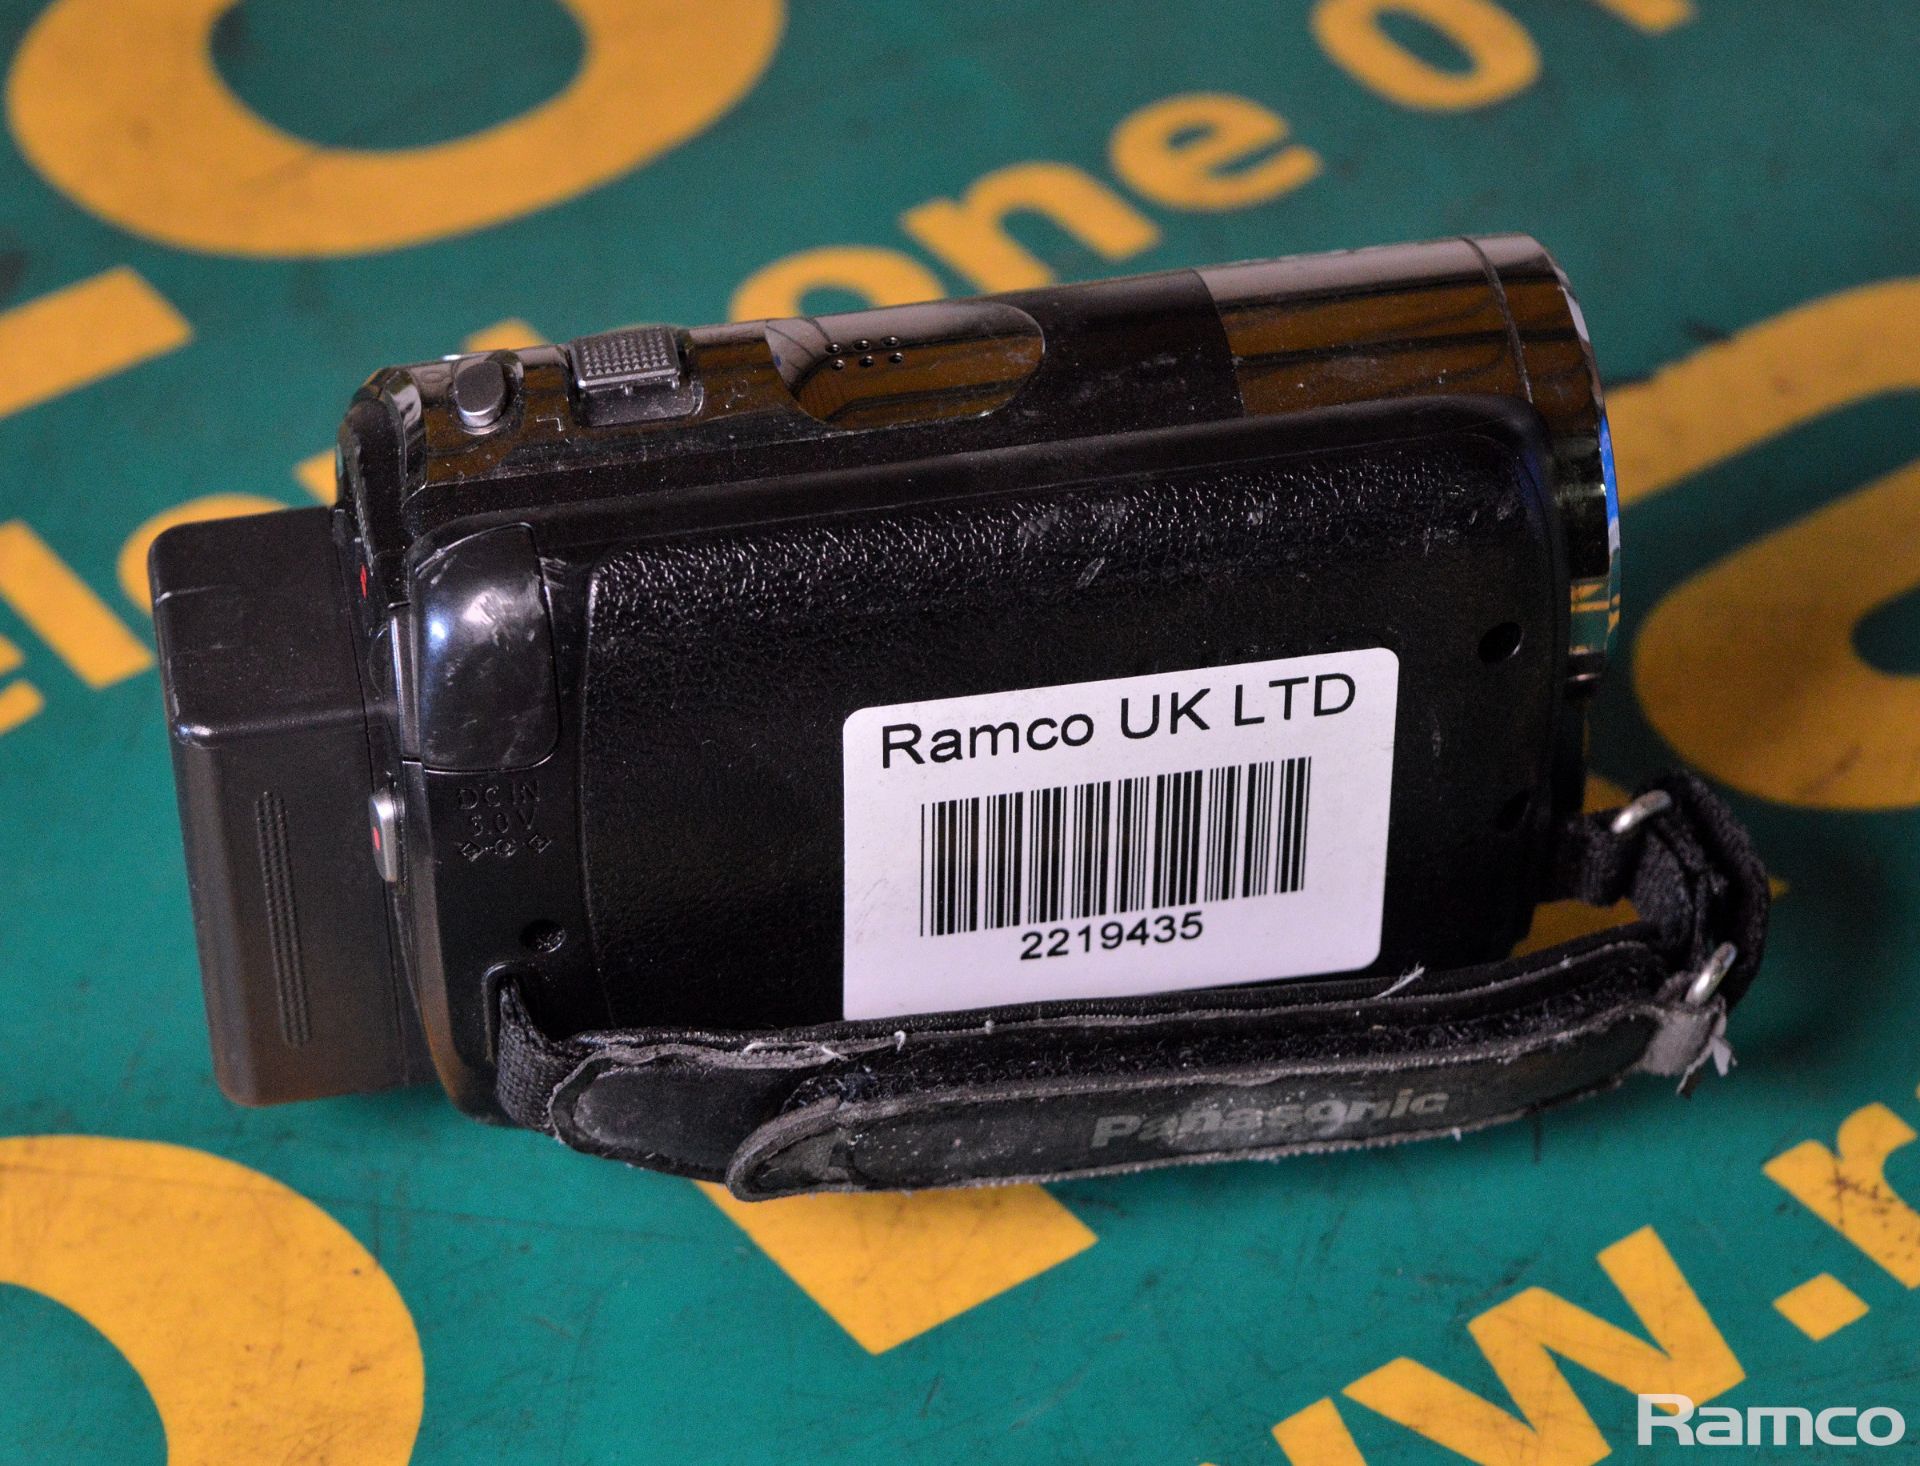 Panasonic SD / HDD Hybrid Camcorder - as spares or repairs - Image 3 of 5